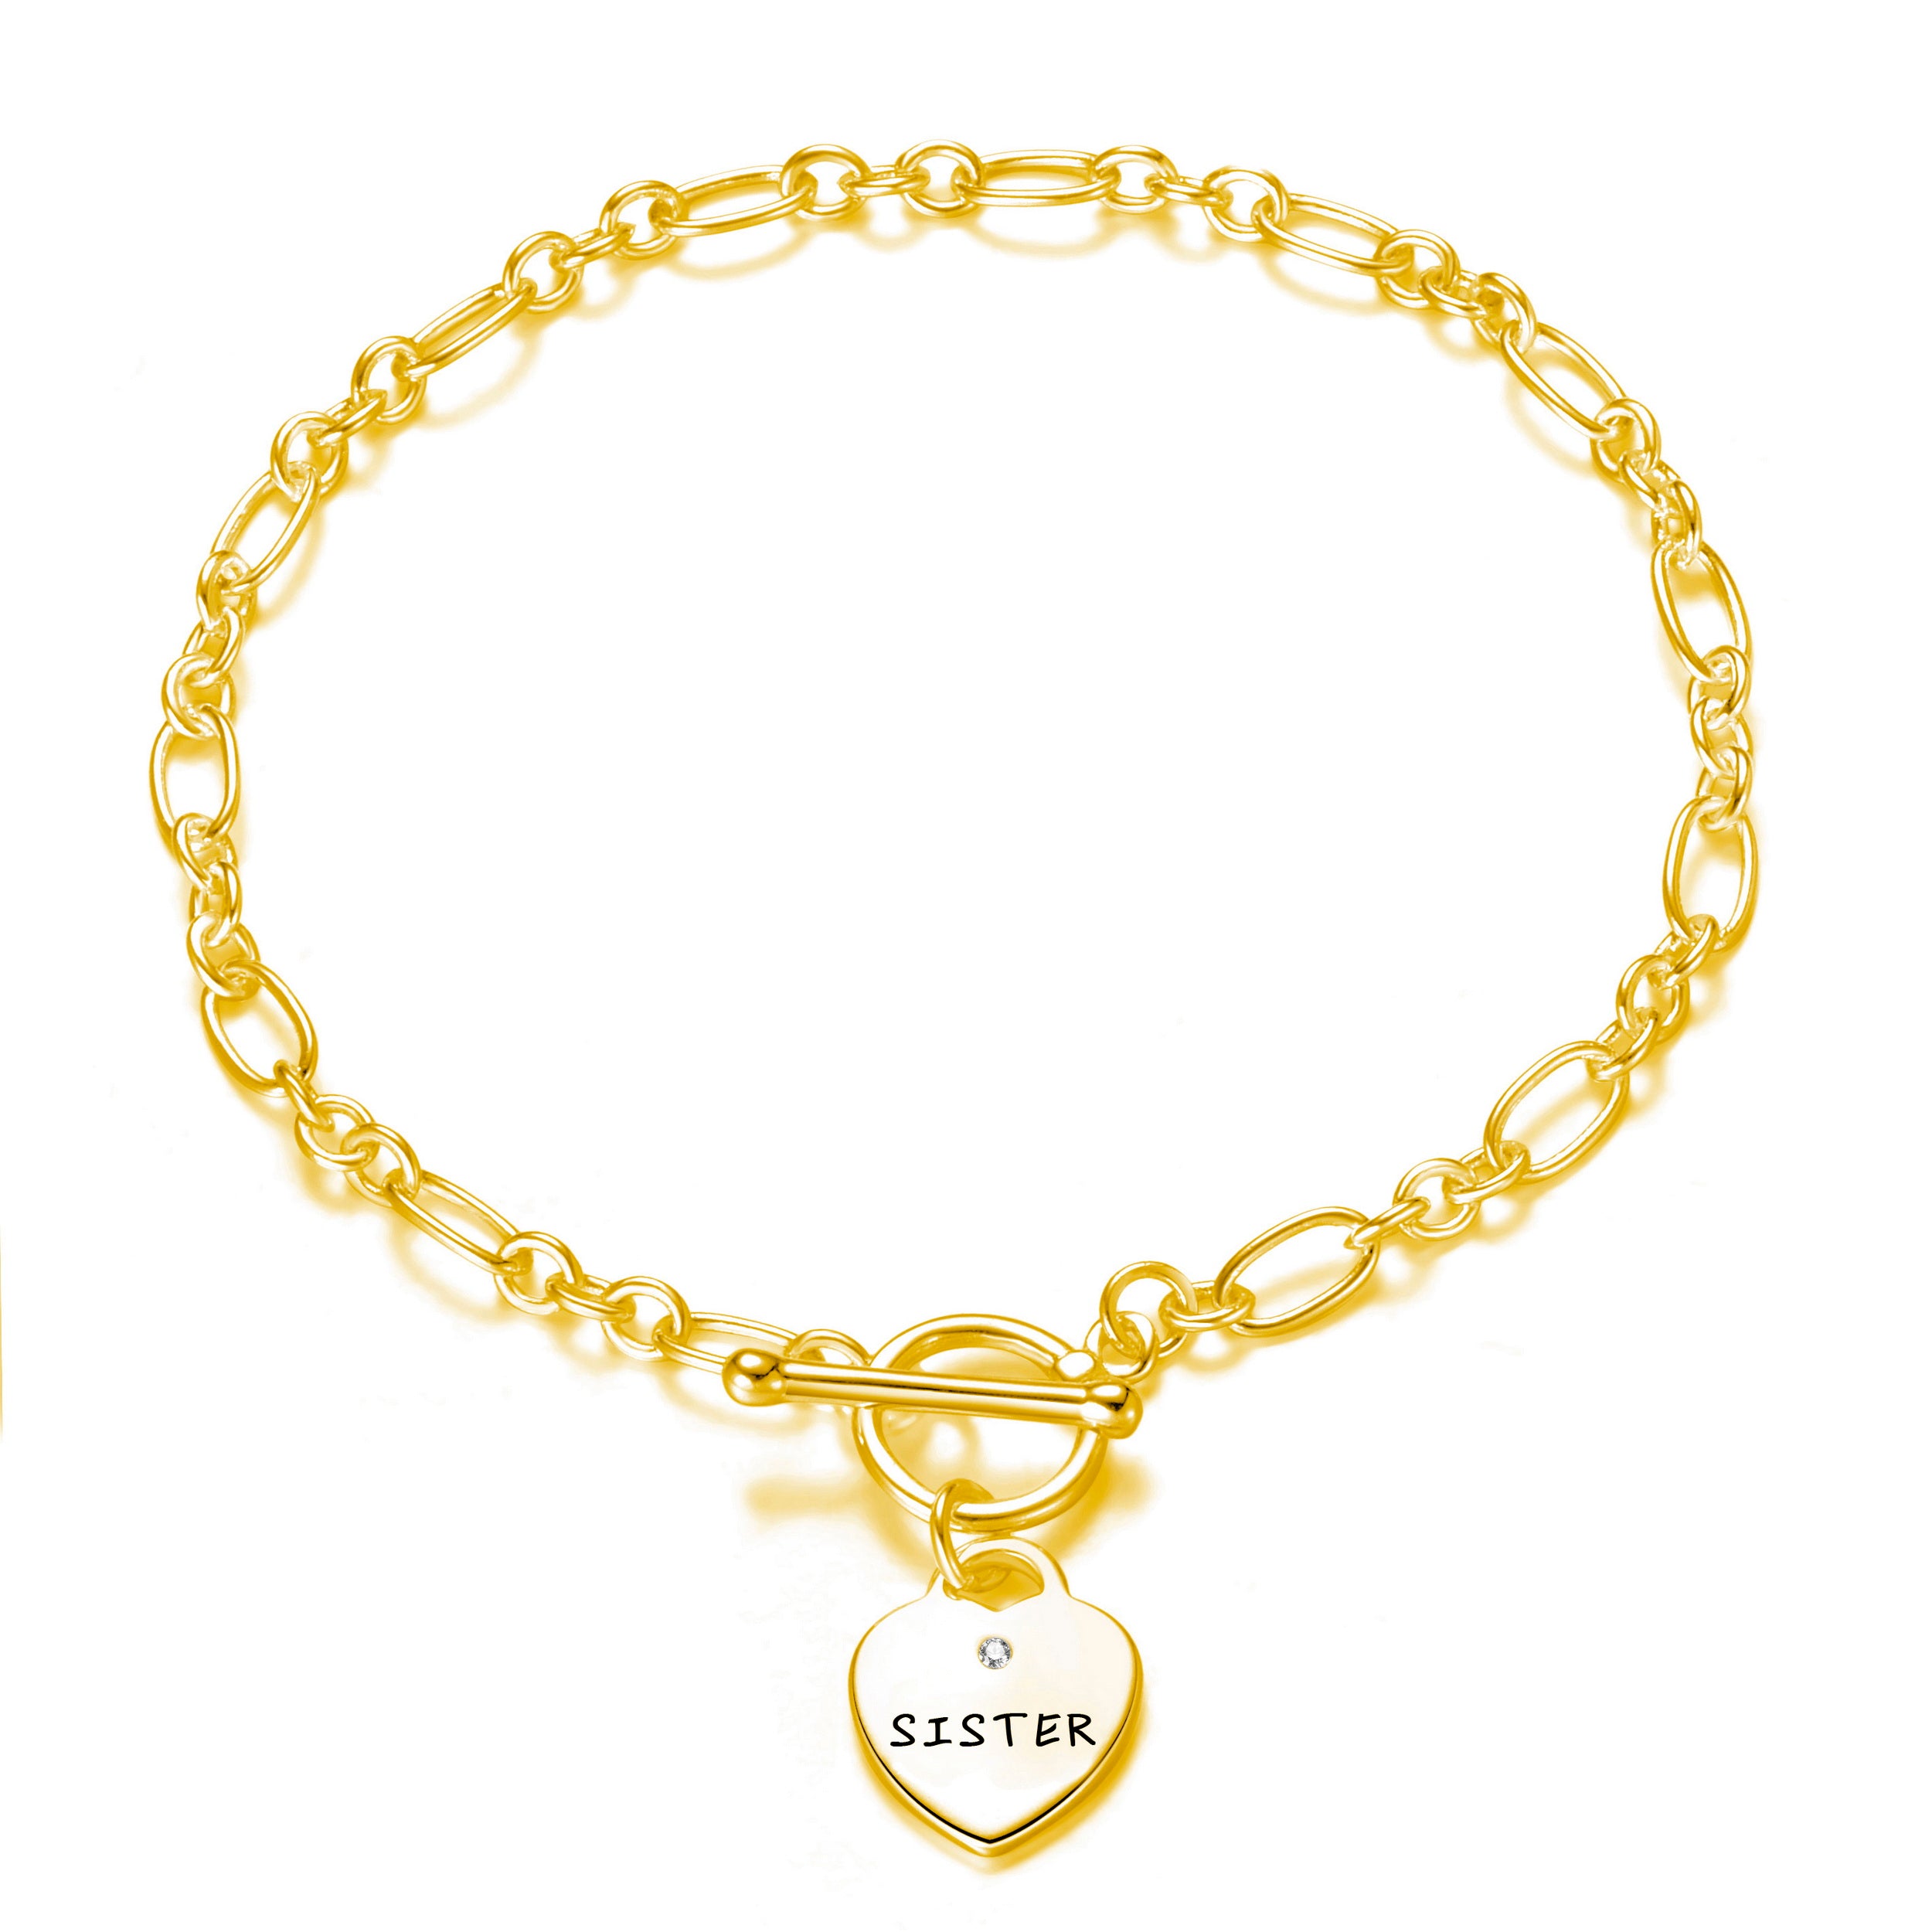 Gold Plated Sister Charm Bracelet Created with Zircondia® Crystals